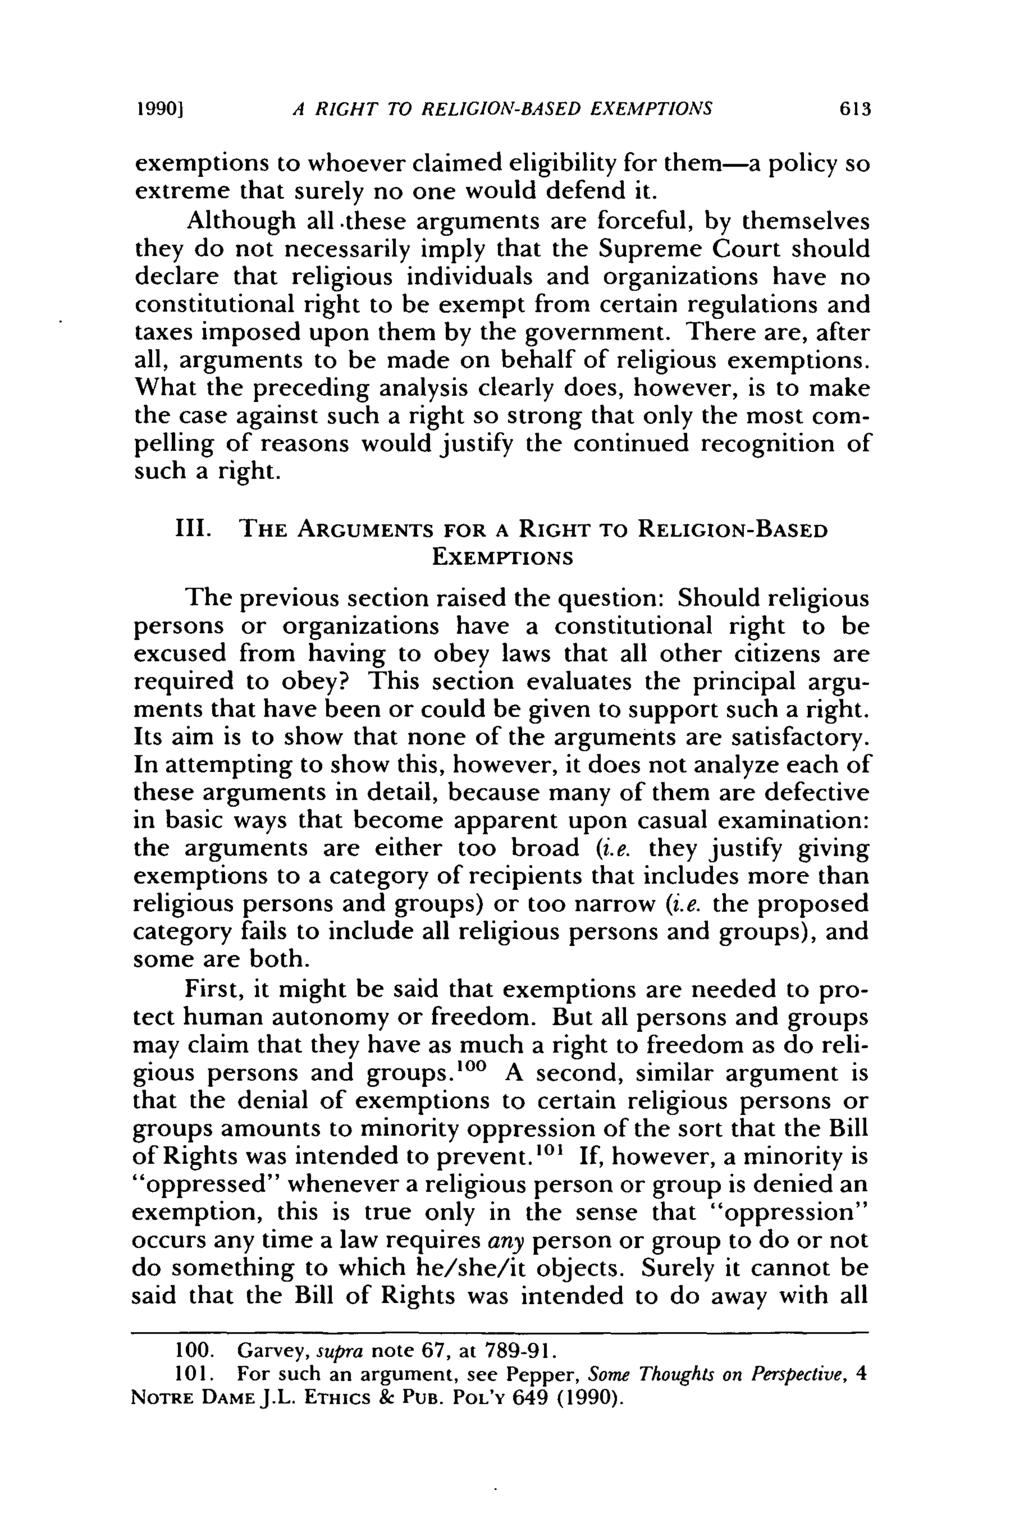 1990] A RIGHT TO RELIGION-BASED EXEMPTIONS exemptions to whoever claimed eligibility for them-a policy so extreme that surely no one would defend it. Although all.